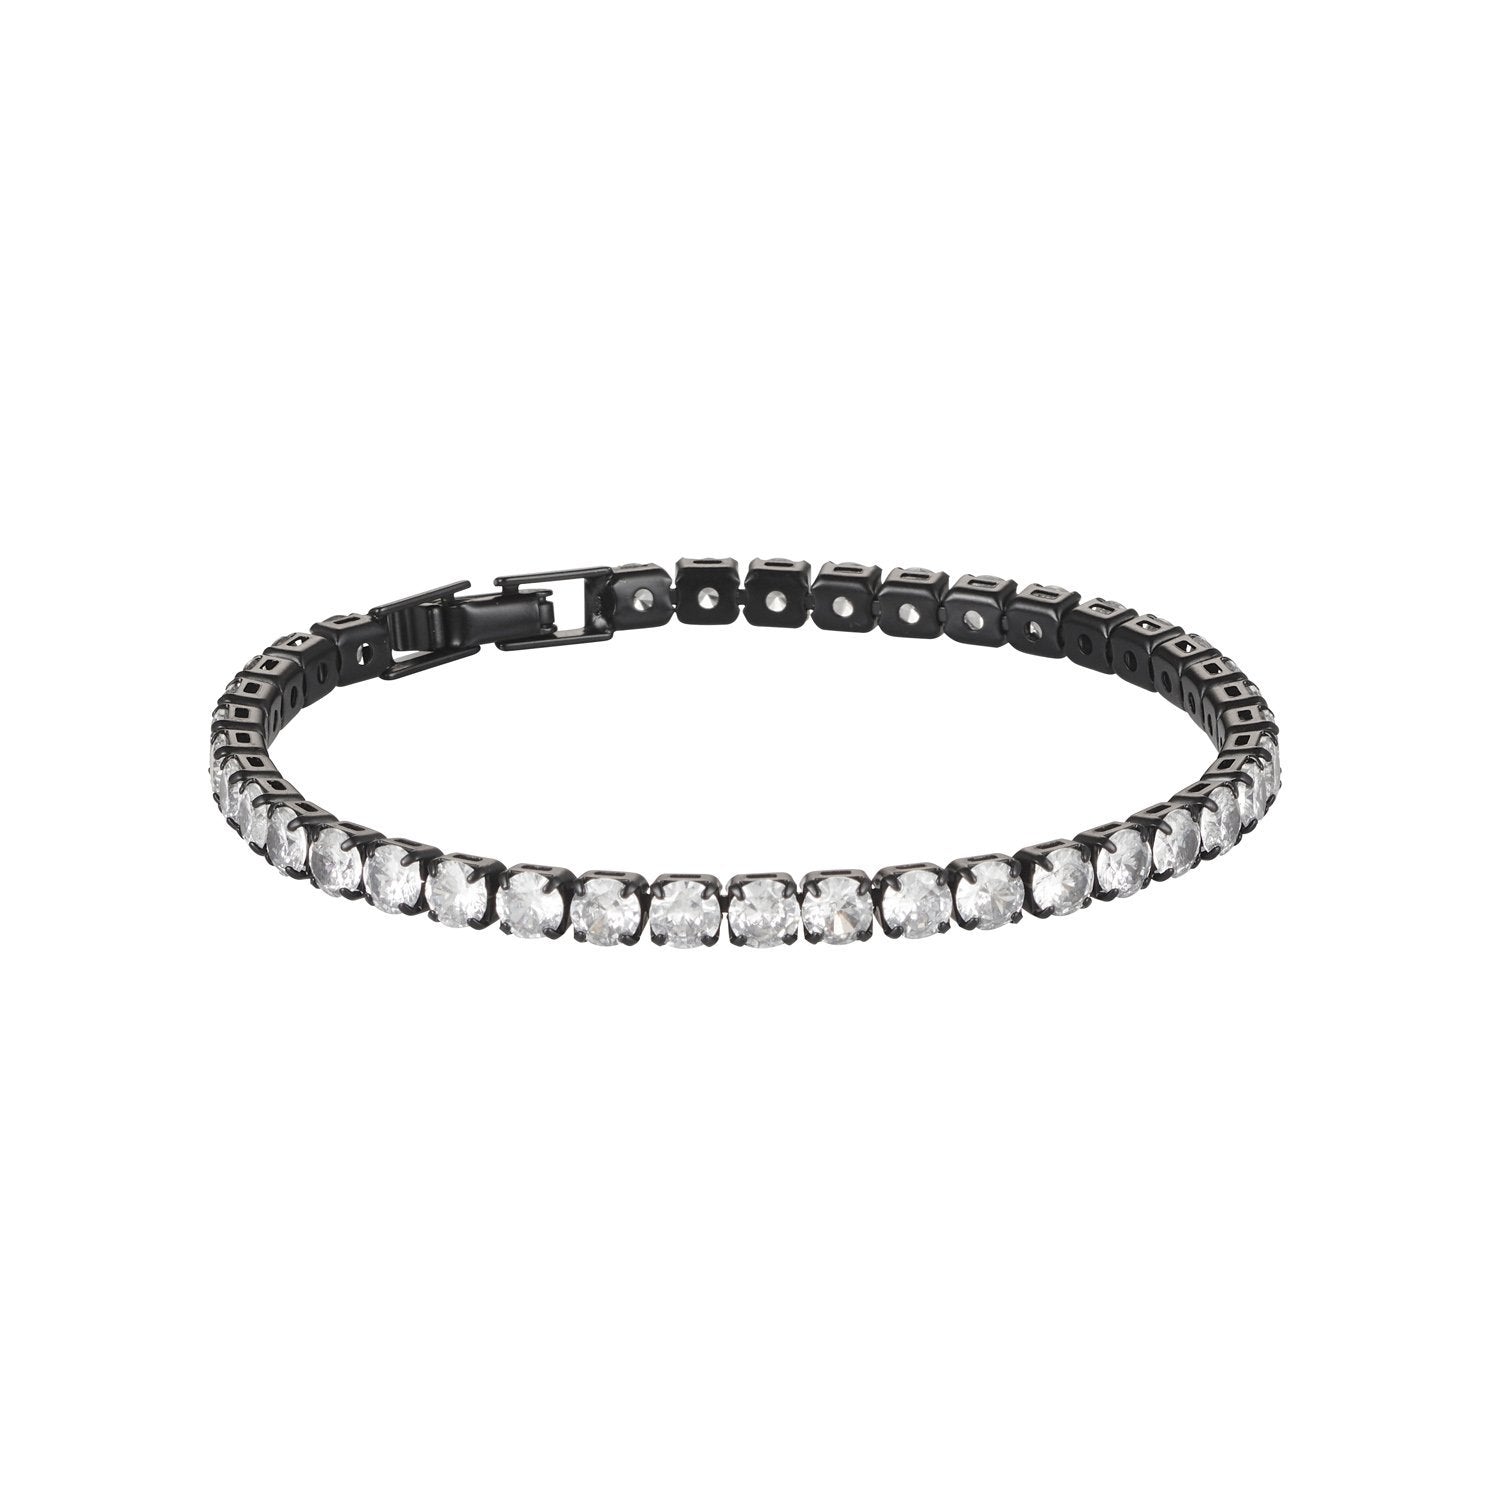 Product photo of tennis bracelet with black hardware and clear diamante stones